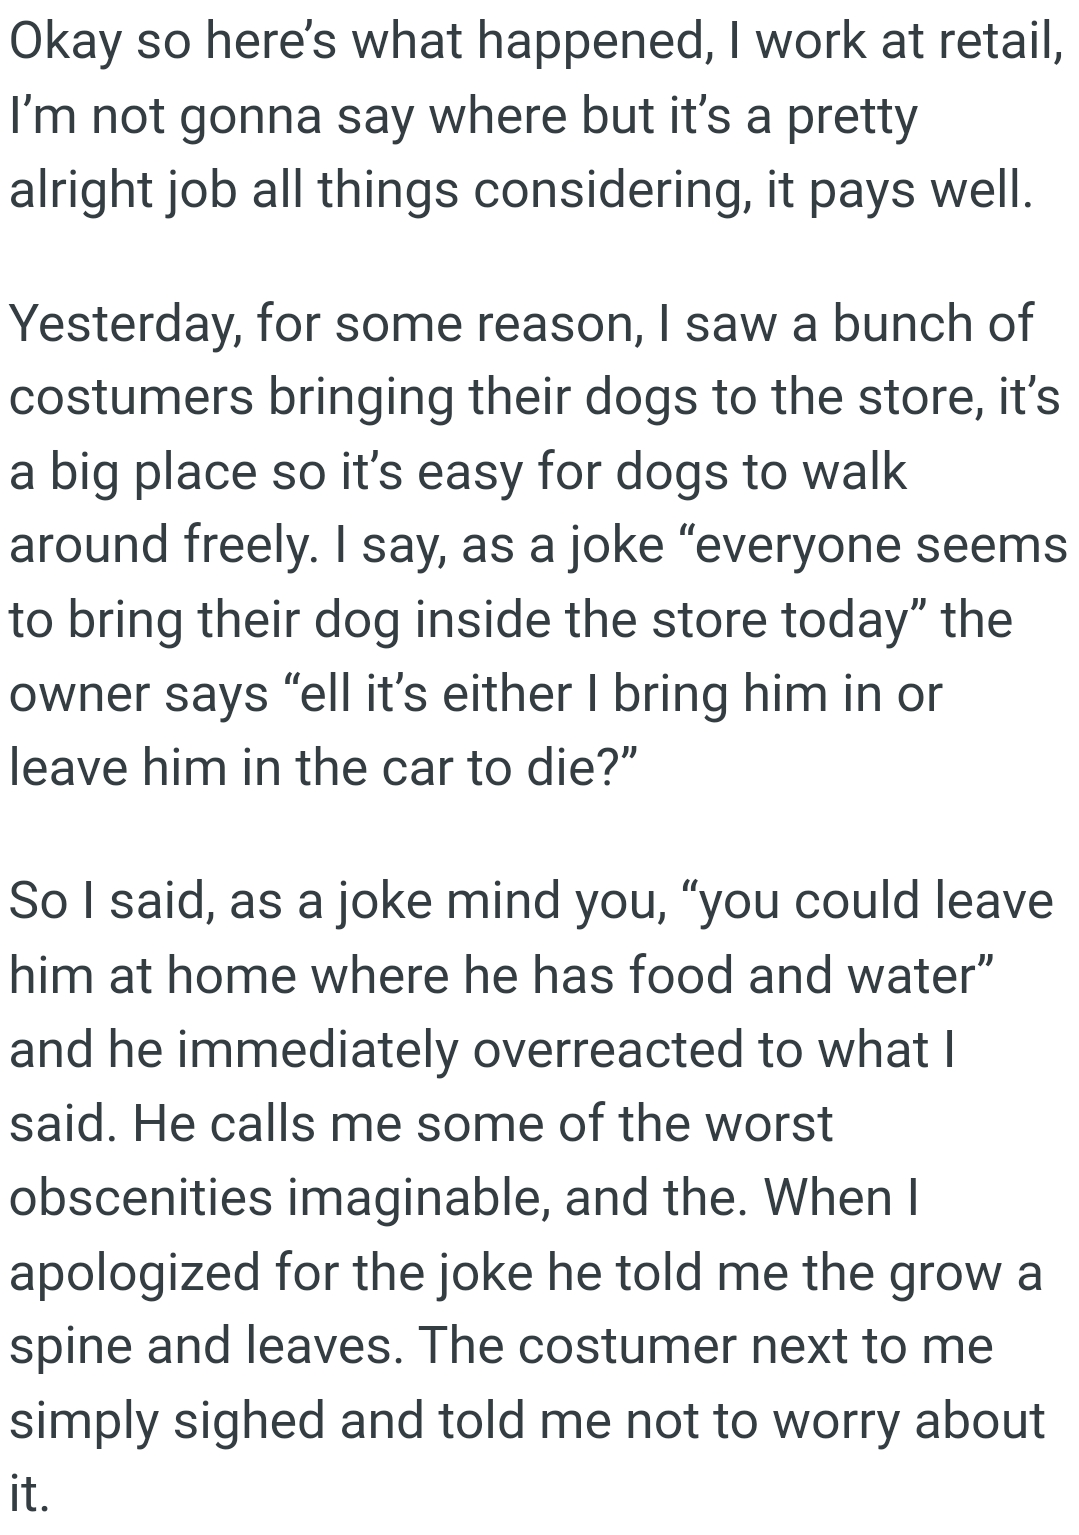 The OP saw a bunch of costumers bringing their dogs to the store